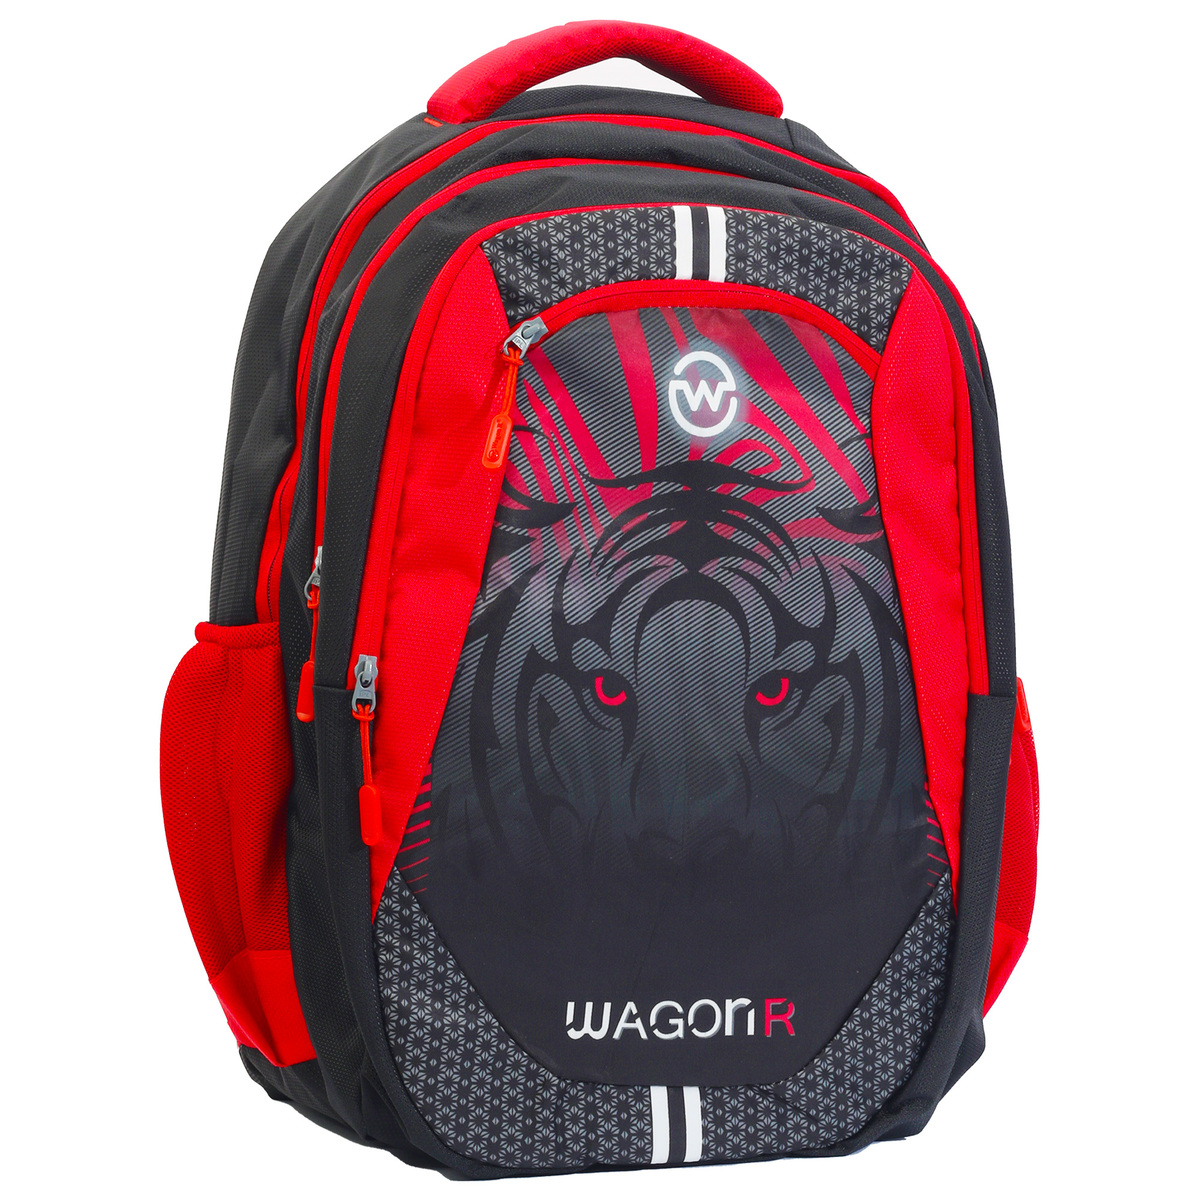 Wagon R Expedition Backpack 3910 19"